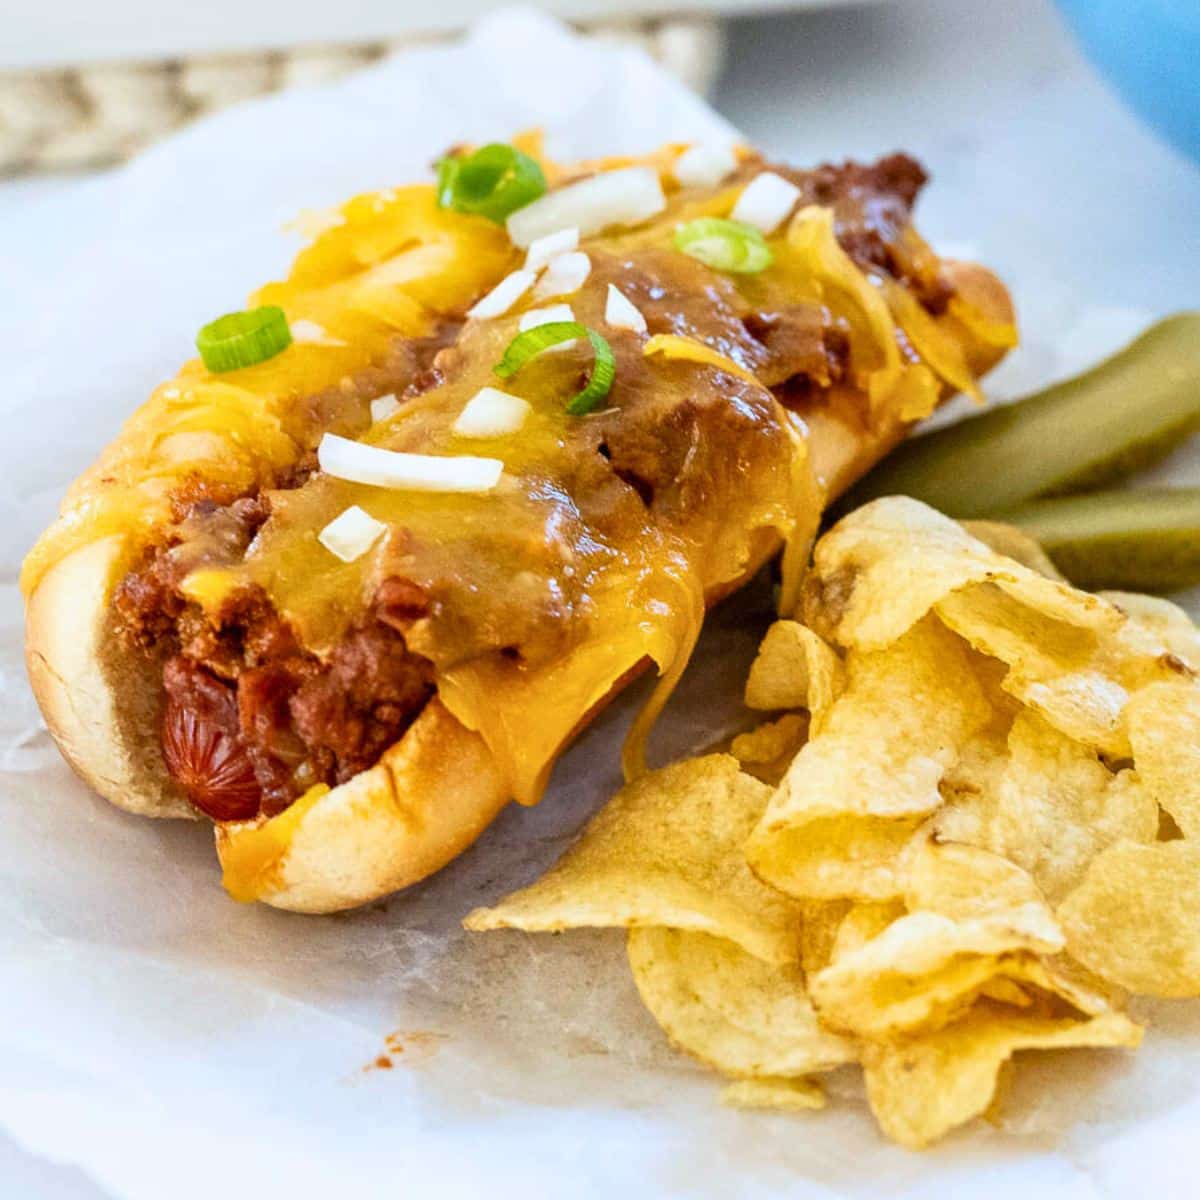 Baked chili cheese dog on a plate with potato chips and pickle spears.